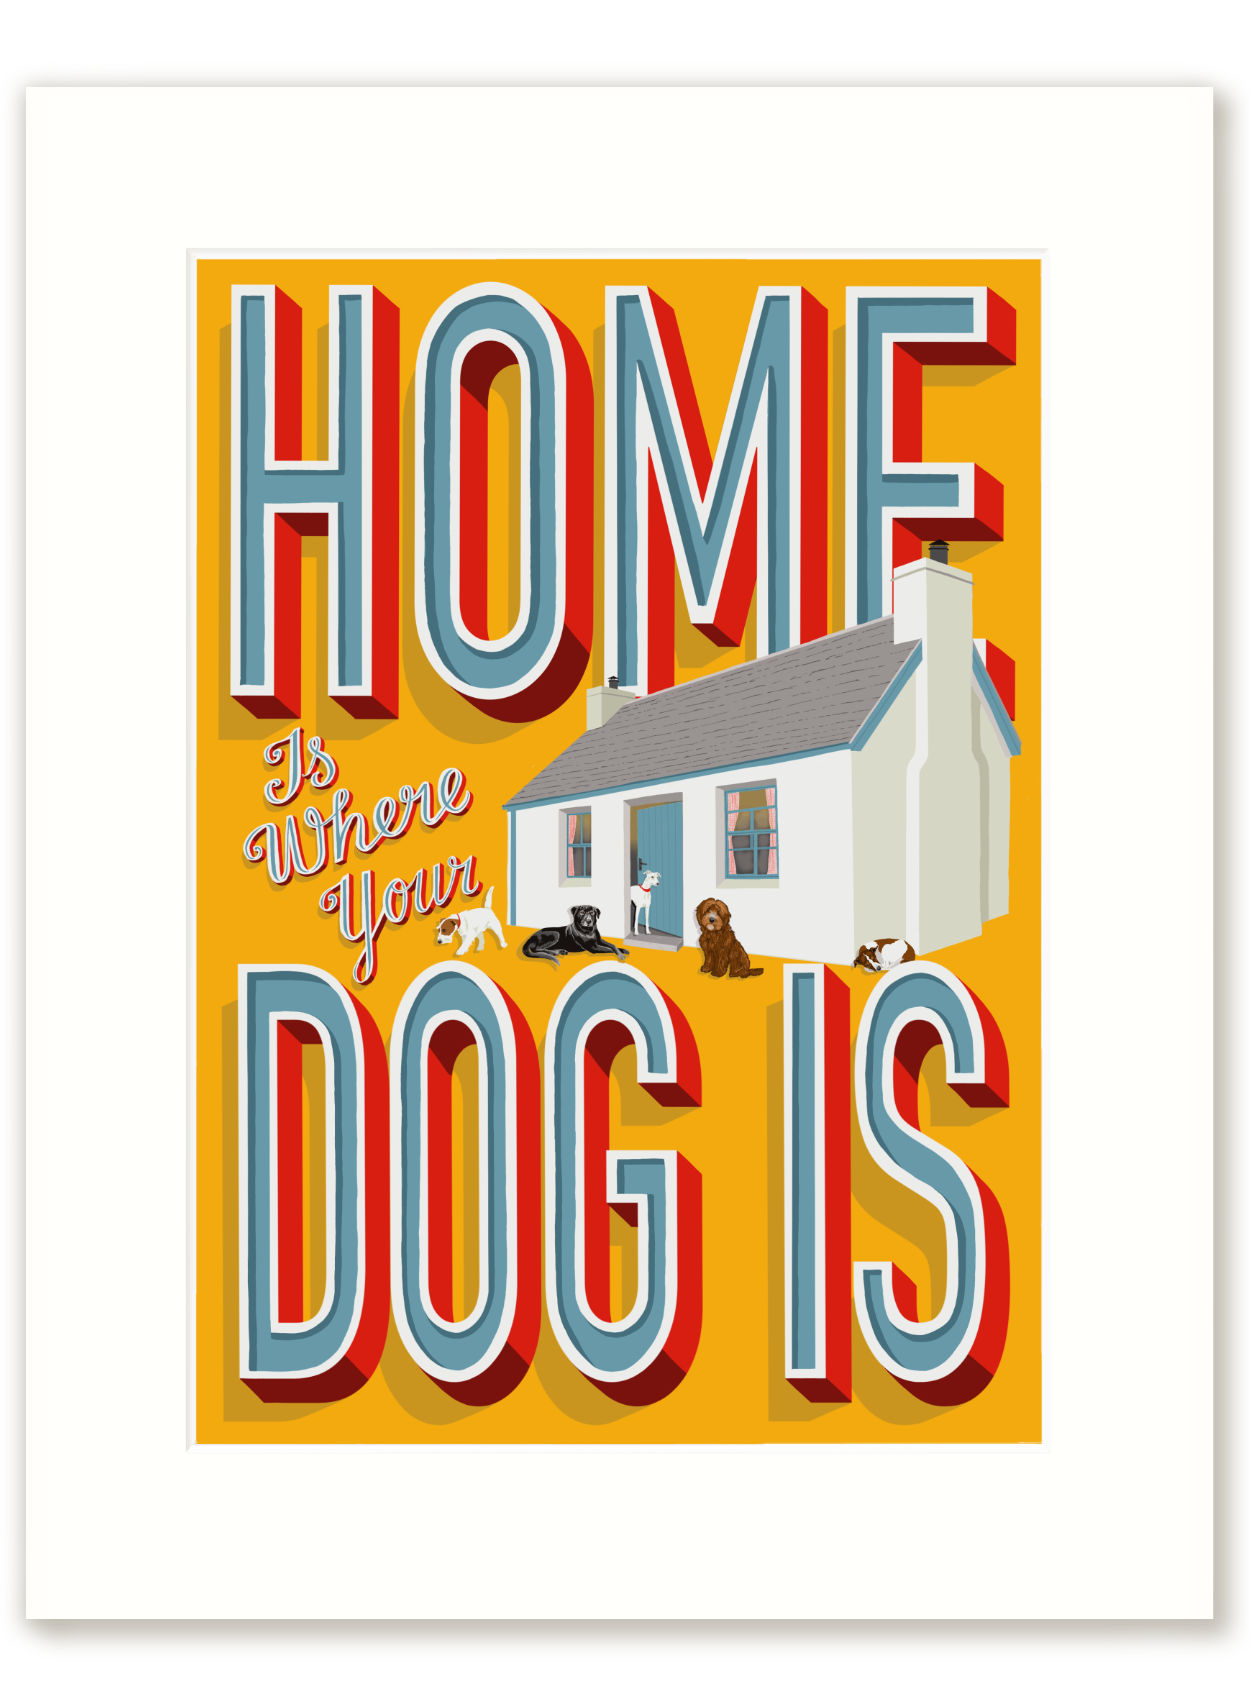 Home is where the dog is art sale | The Enlightened Hound